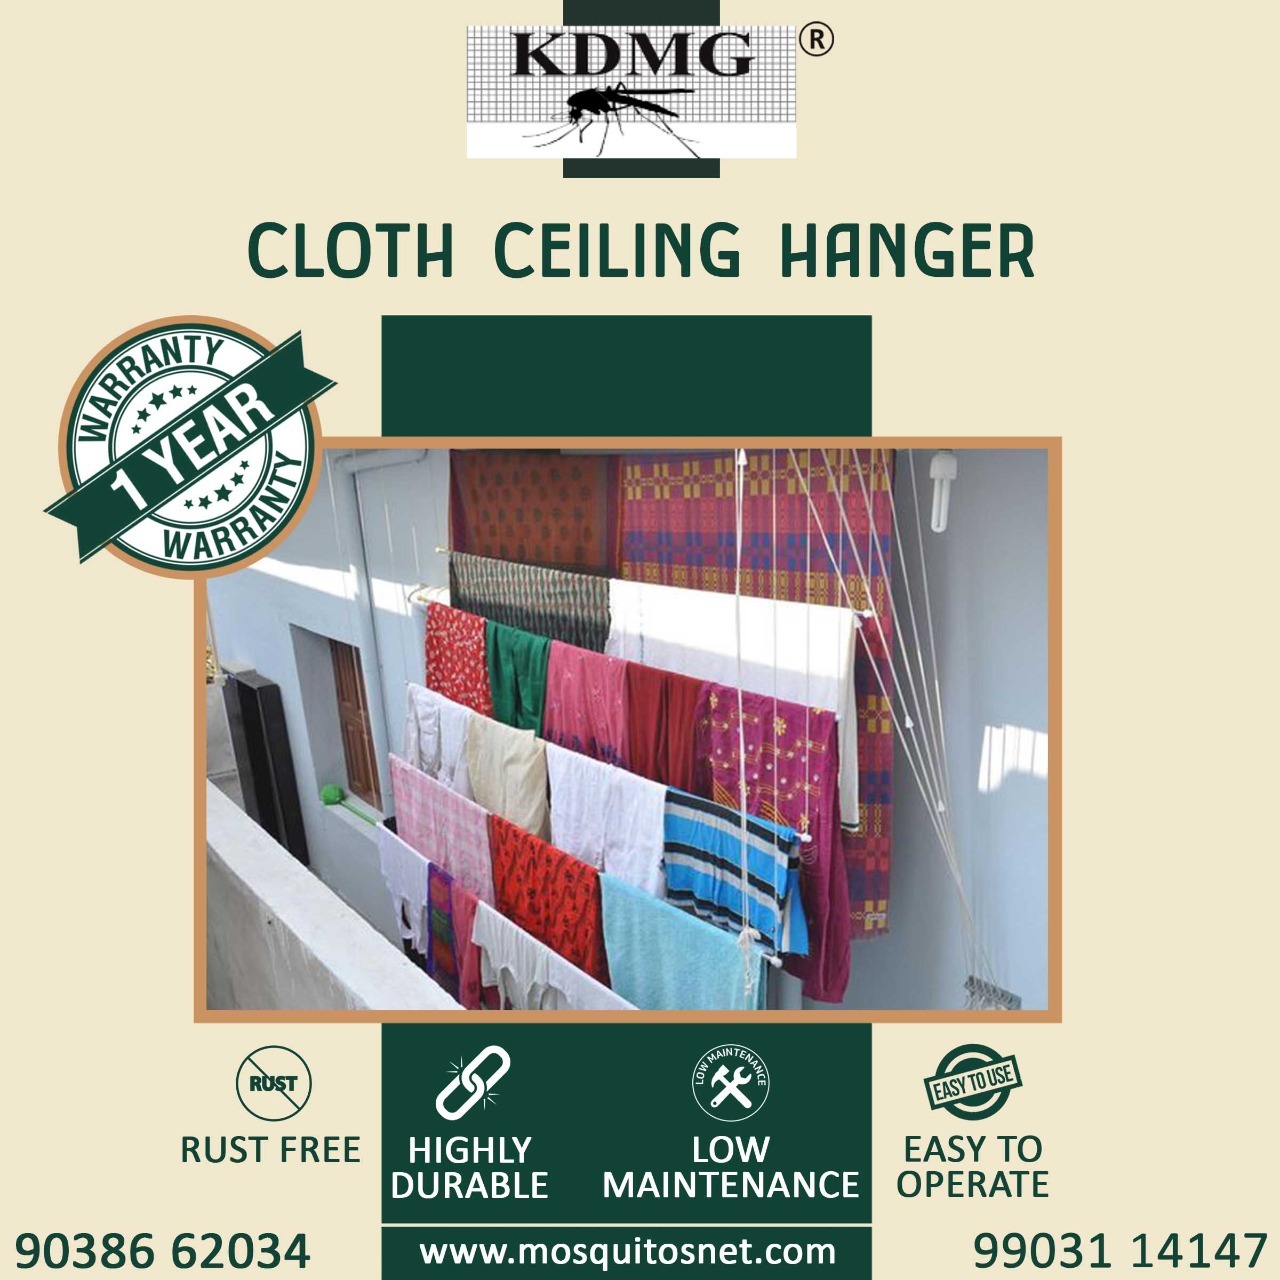 stainless steel ceiling cloth hanger